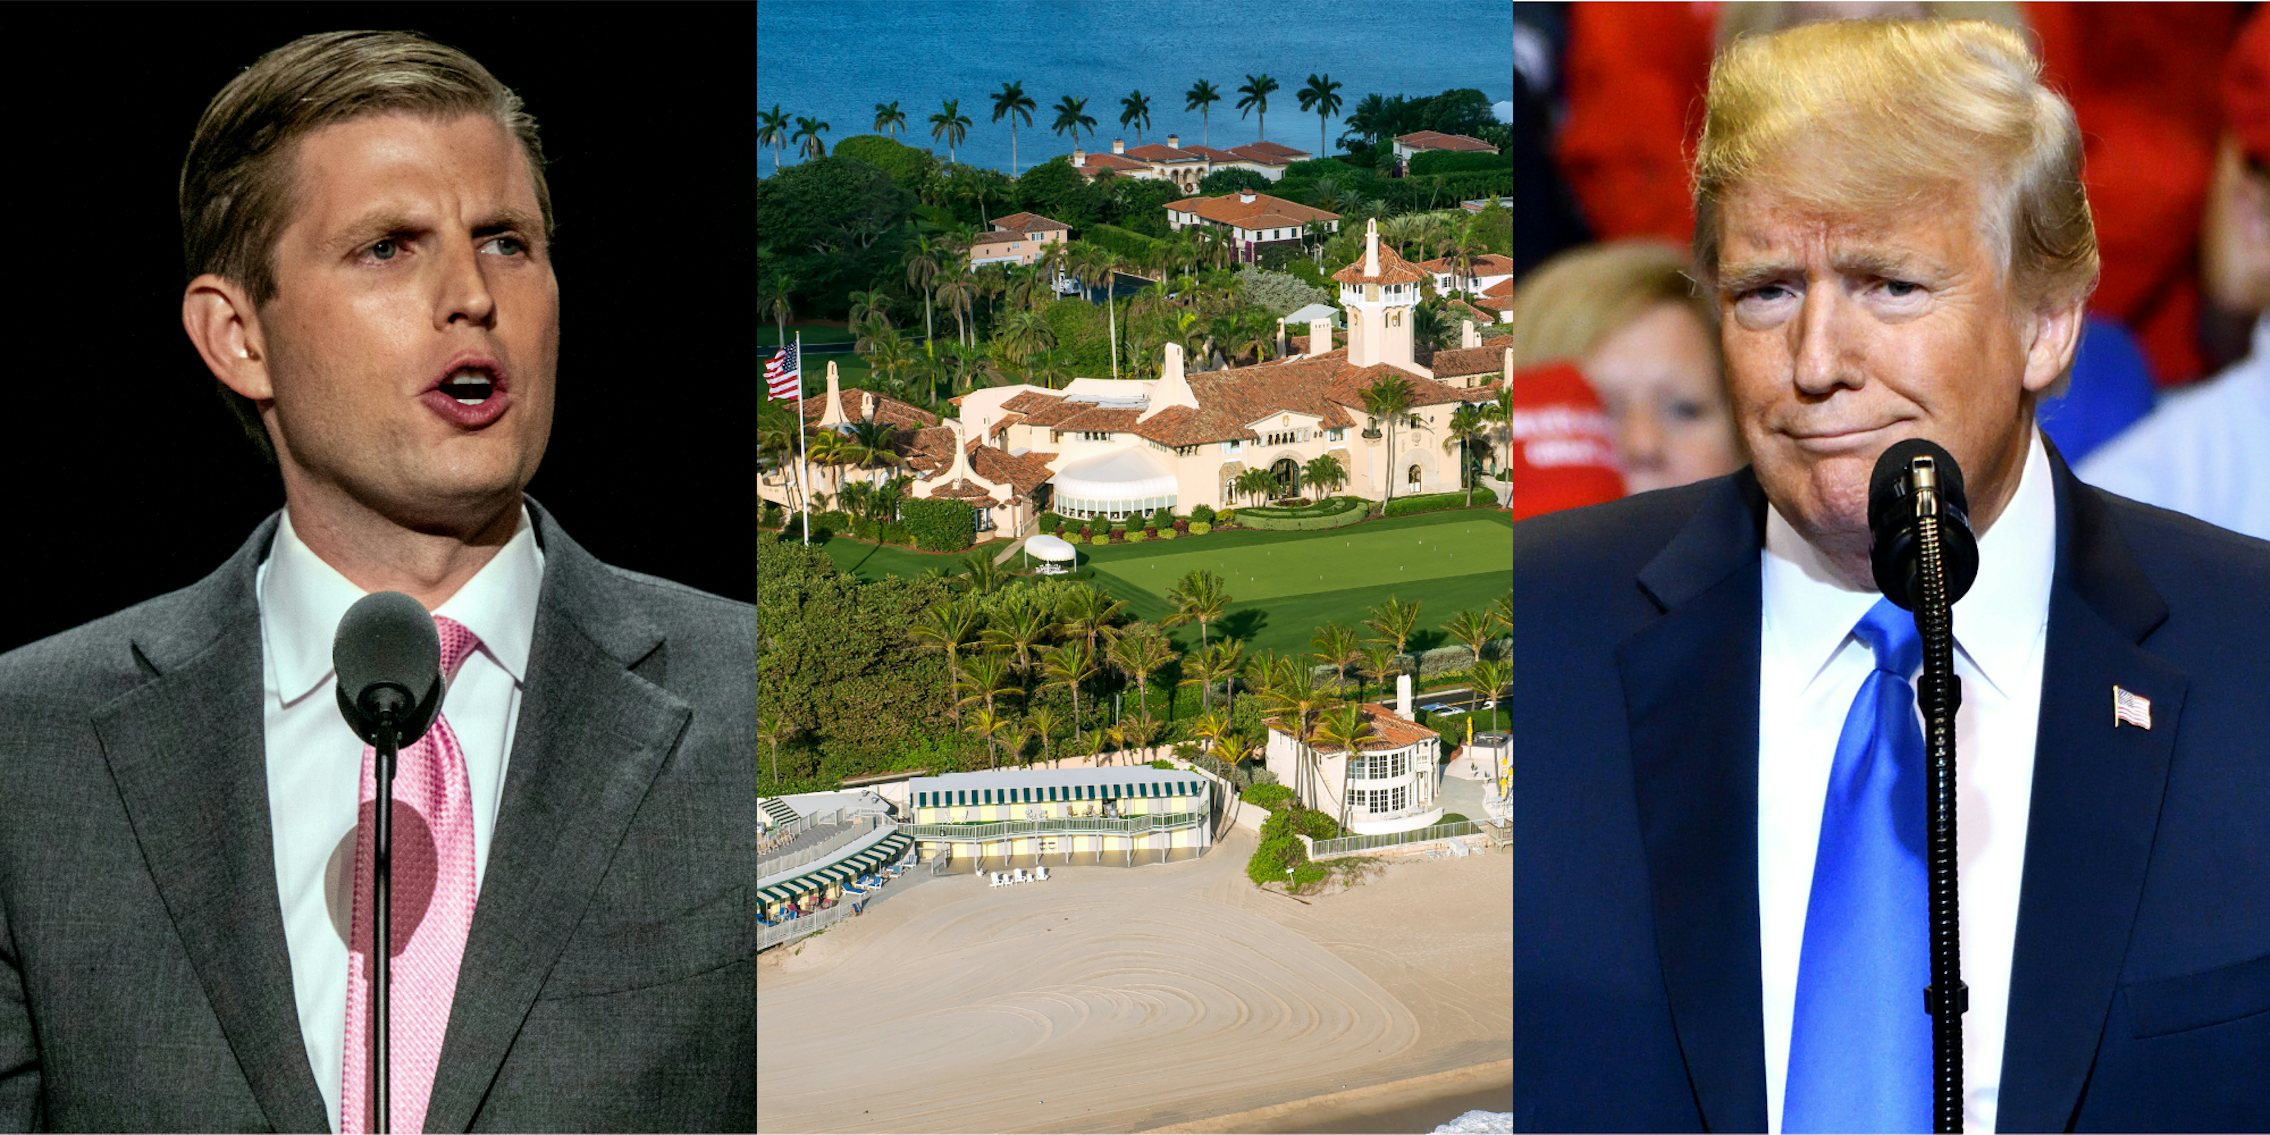 Eric Trump speaking in front of black background (l) Mar-a-Lago resort in Florida (c) Donald Trump with microphone in front of crowd (r)